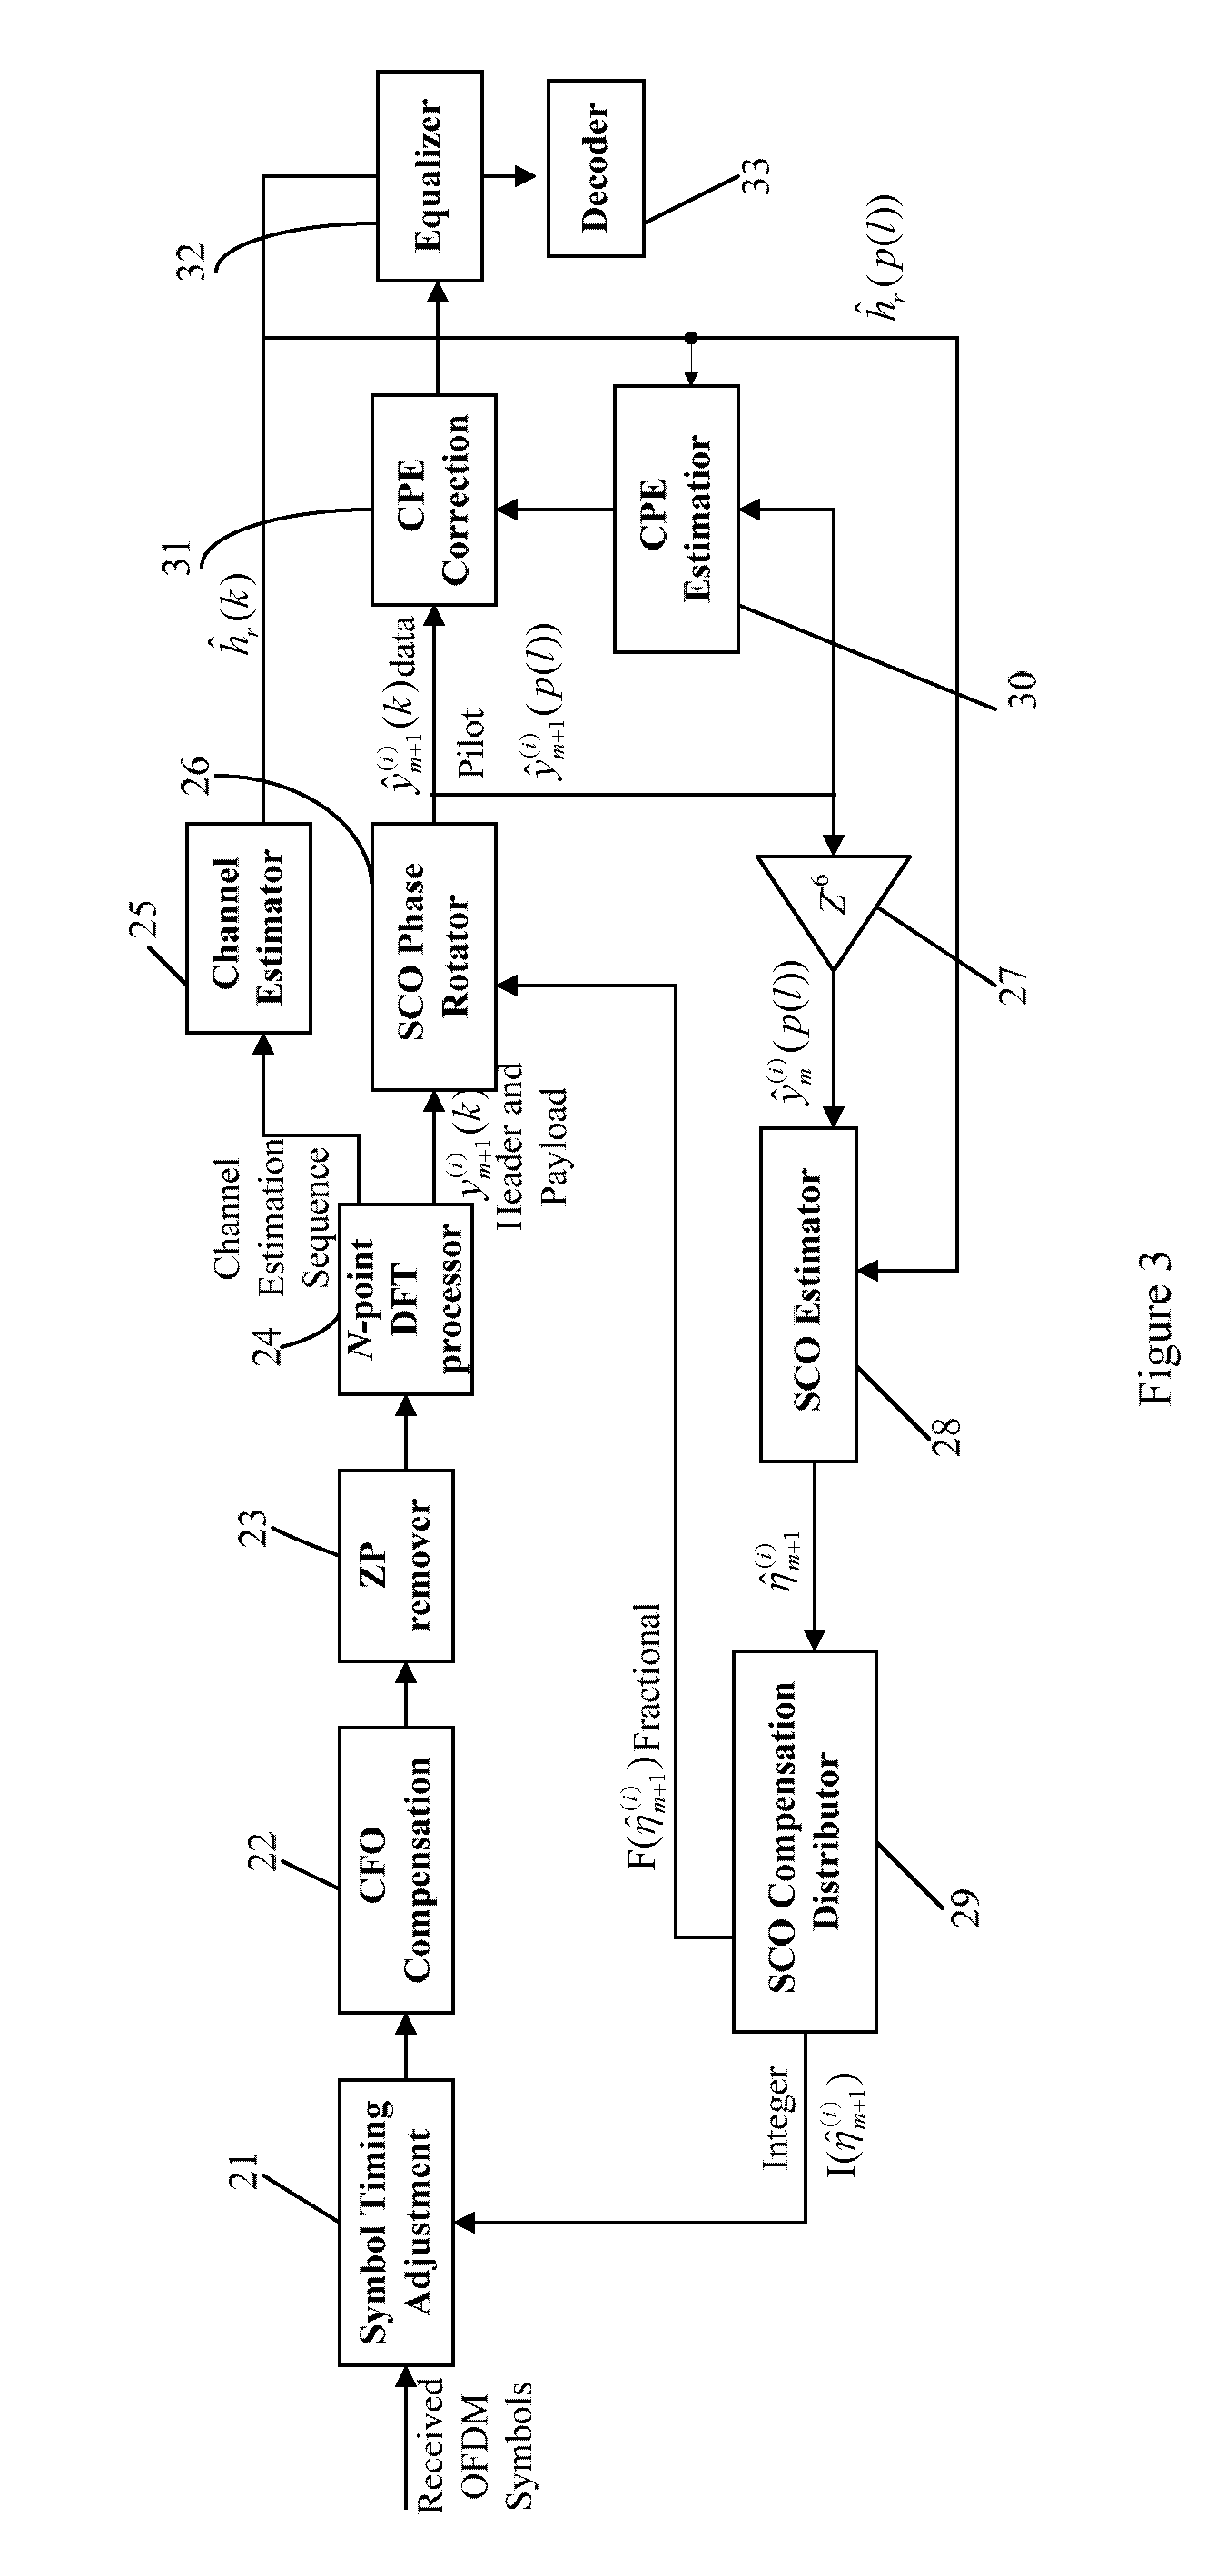 Apparatus and methods for estimating and compensating sampling clock offset